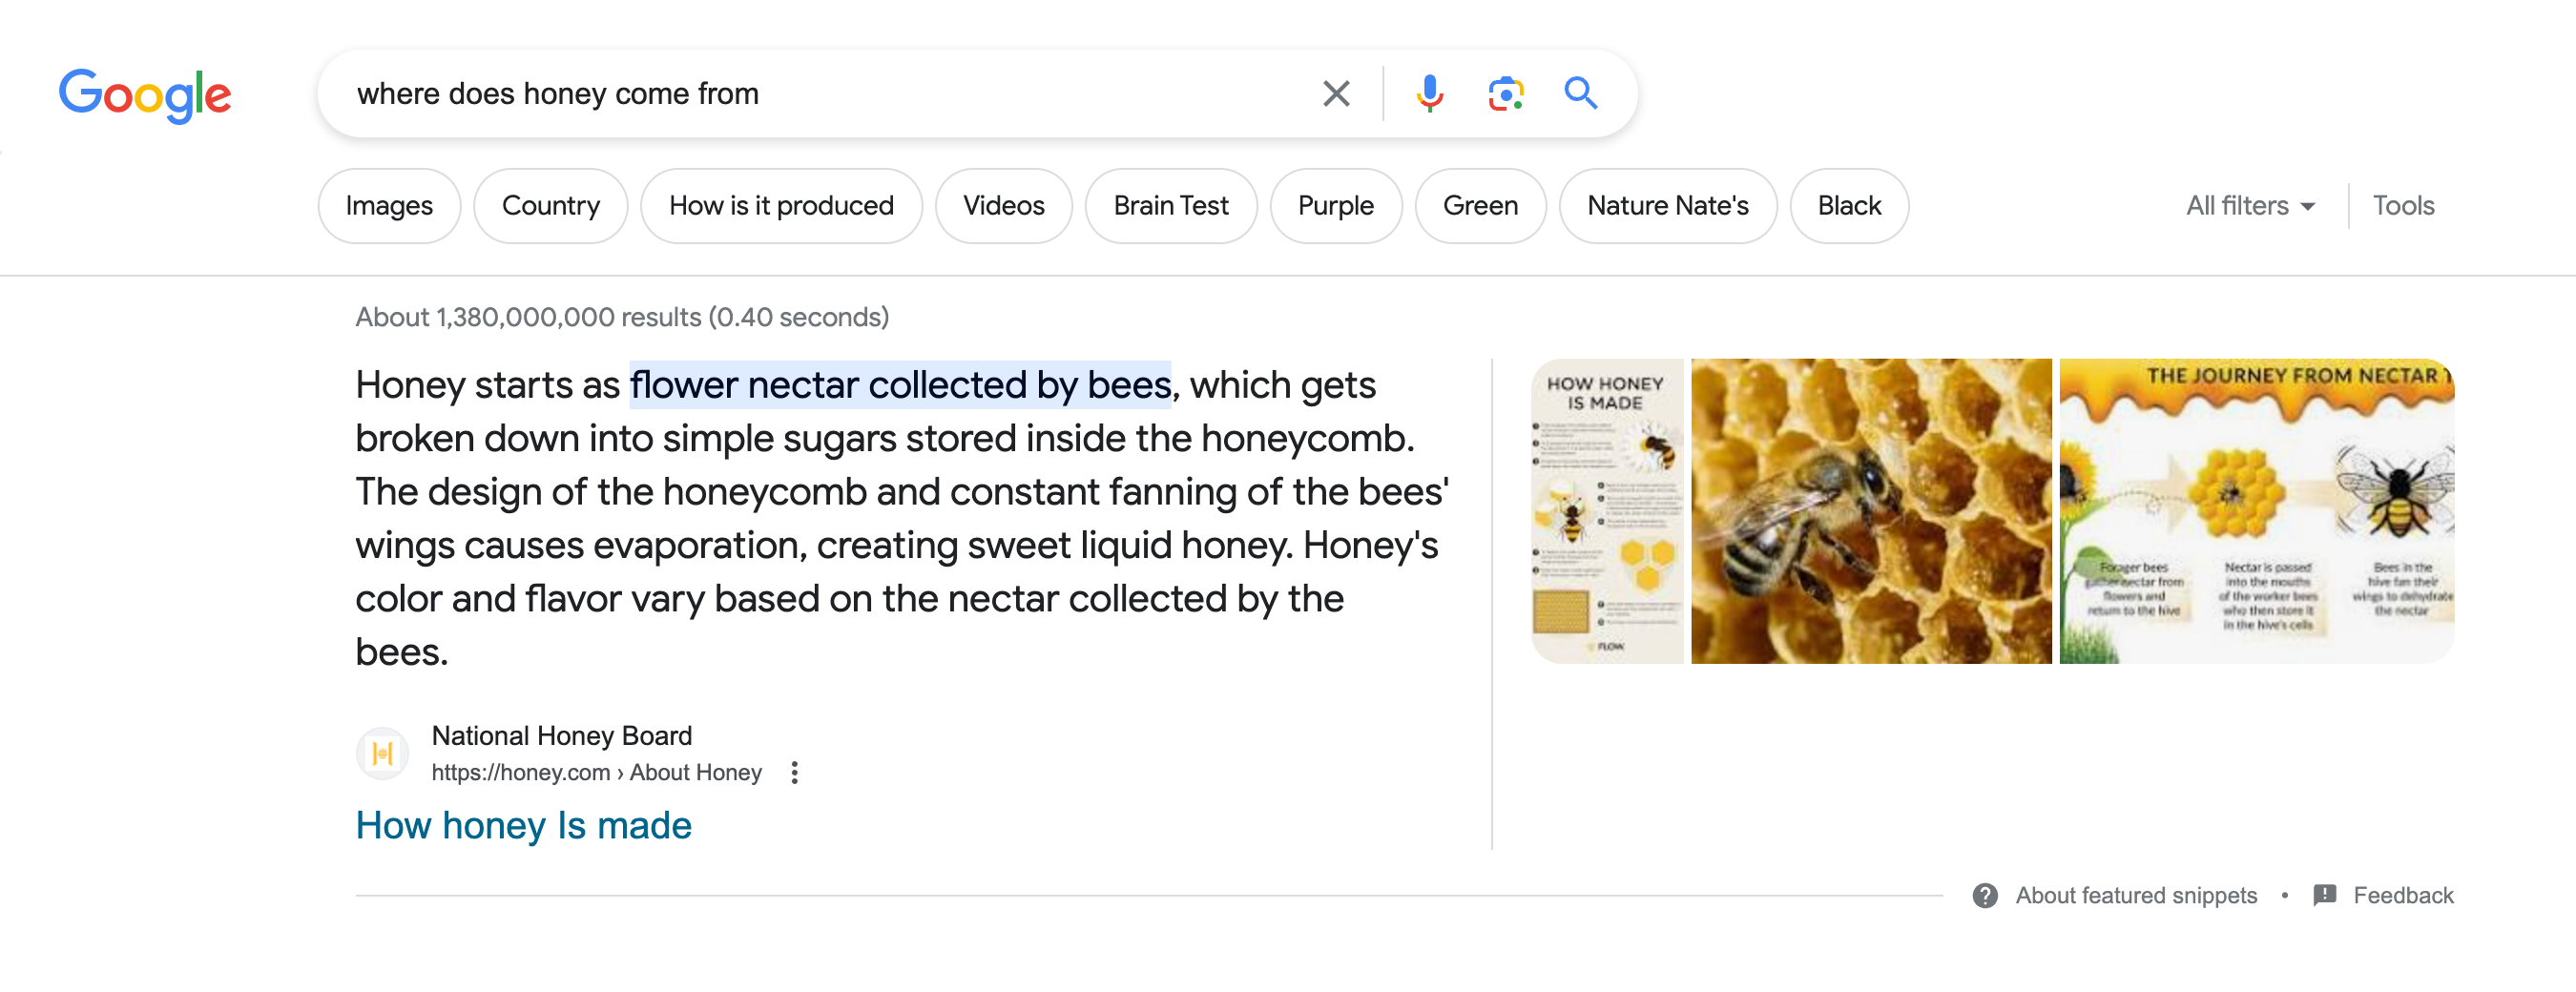 Search results page for the search query "where does honey come from". First, a Featured Snippet box is displayed in which, in addition to the text, images are also displayed.